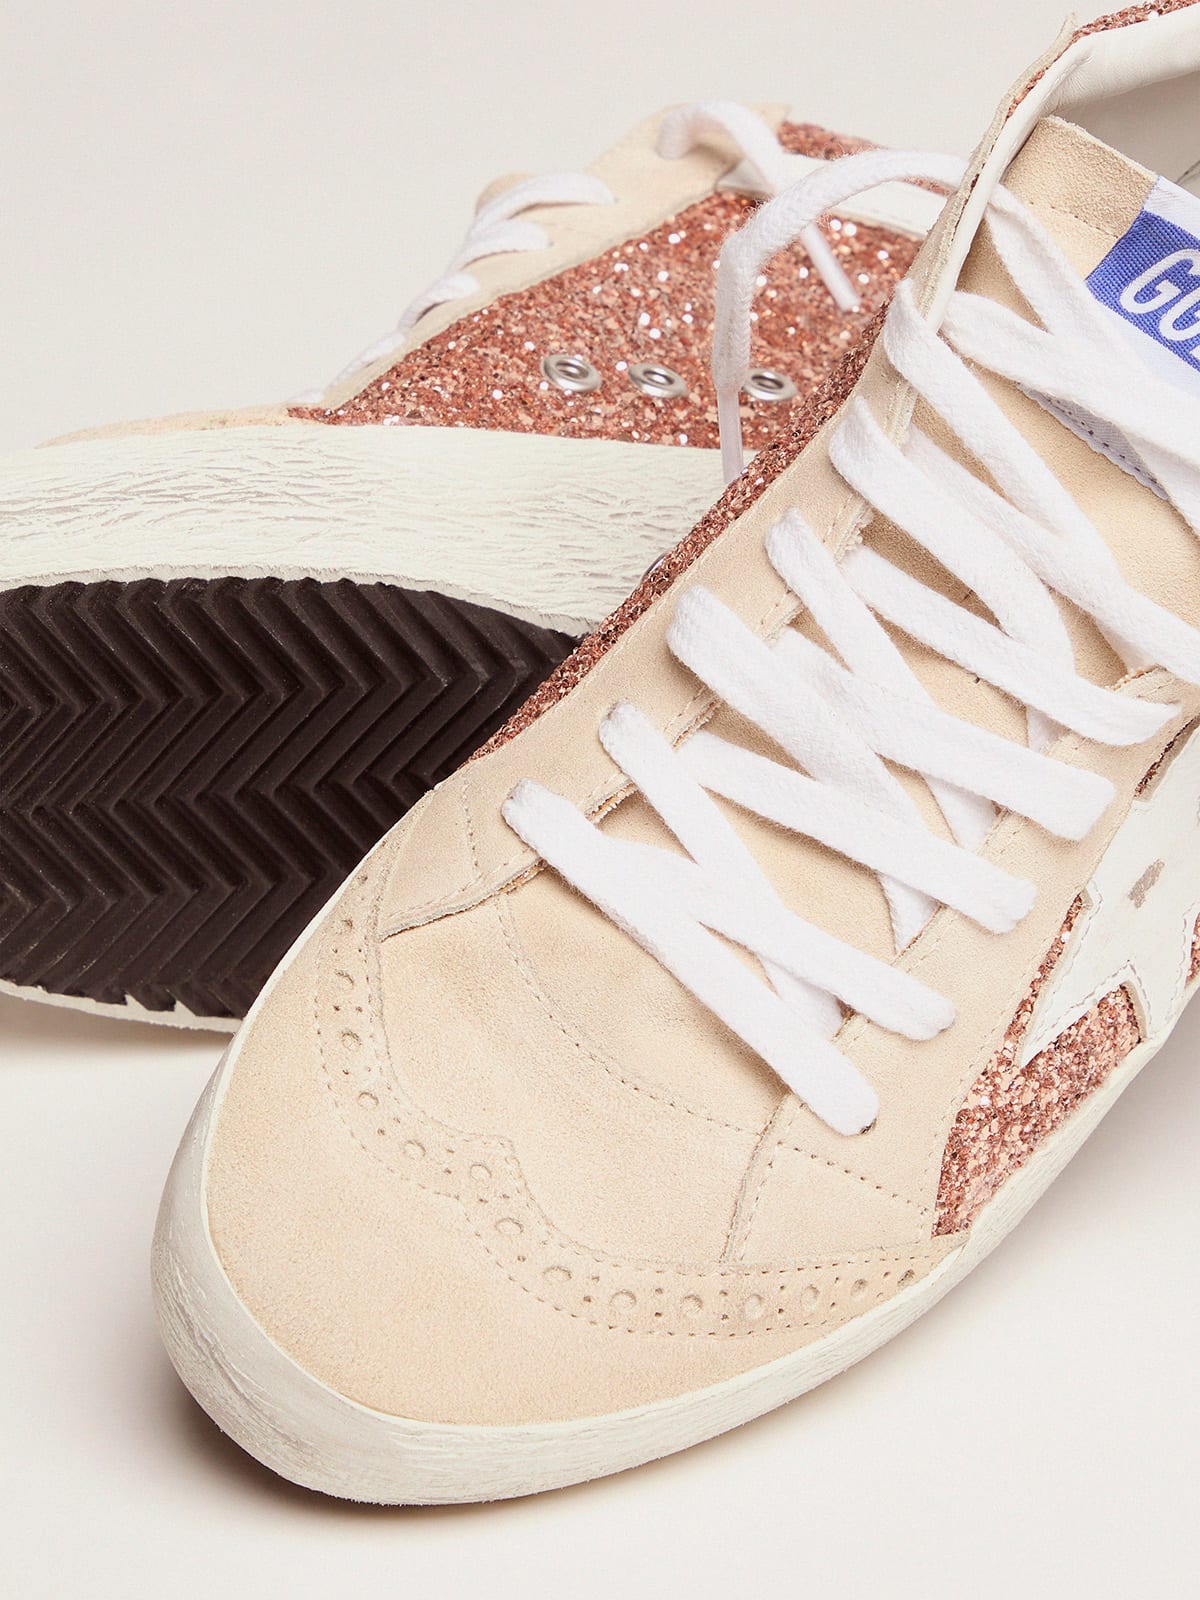 Golden Goose - Women's Mid Star with gold glitter in 